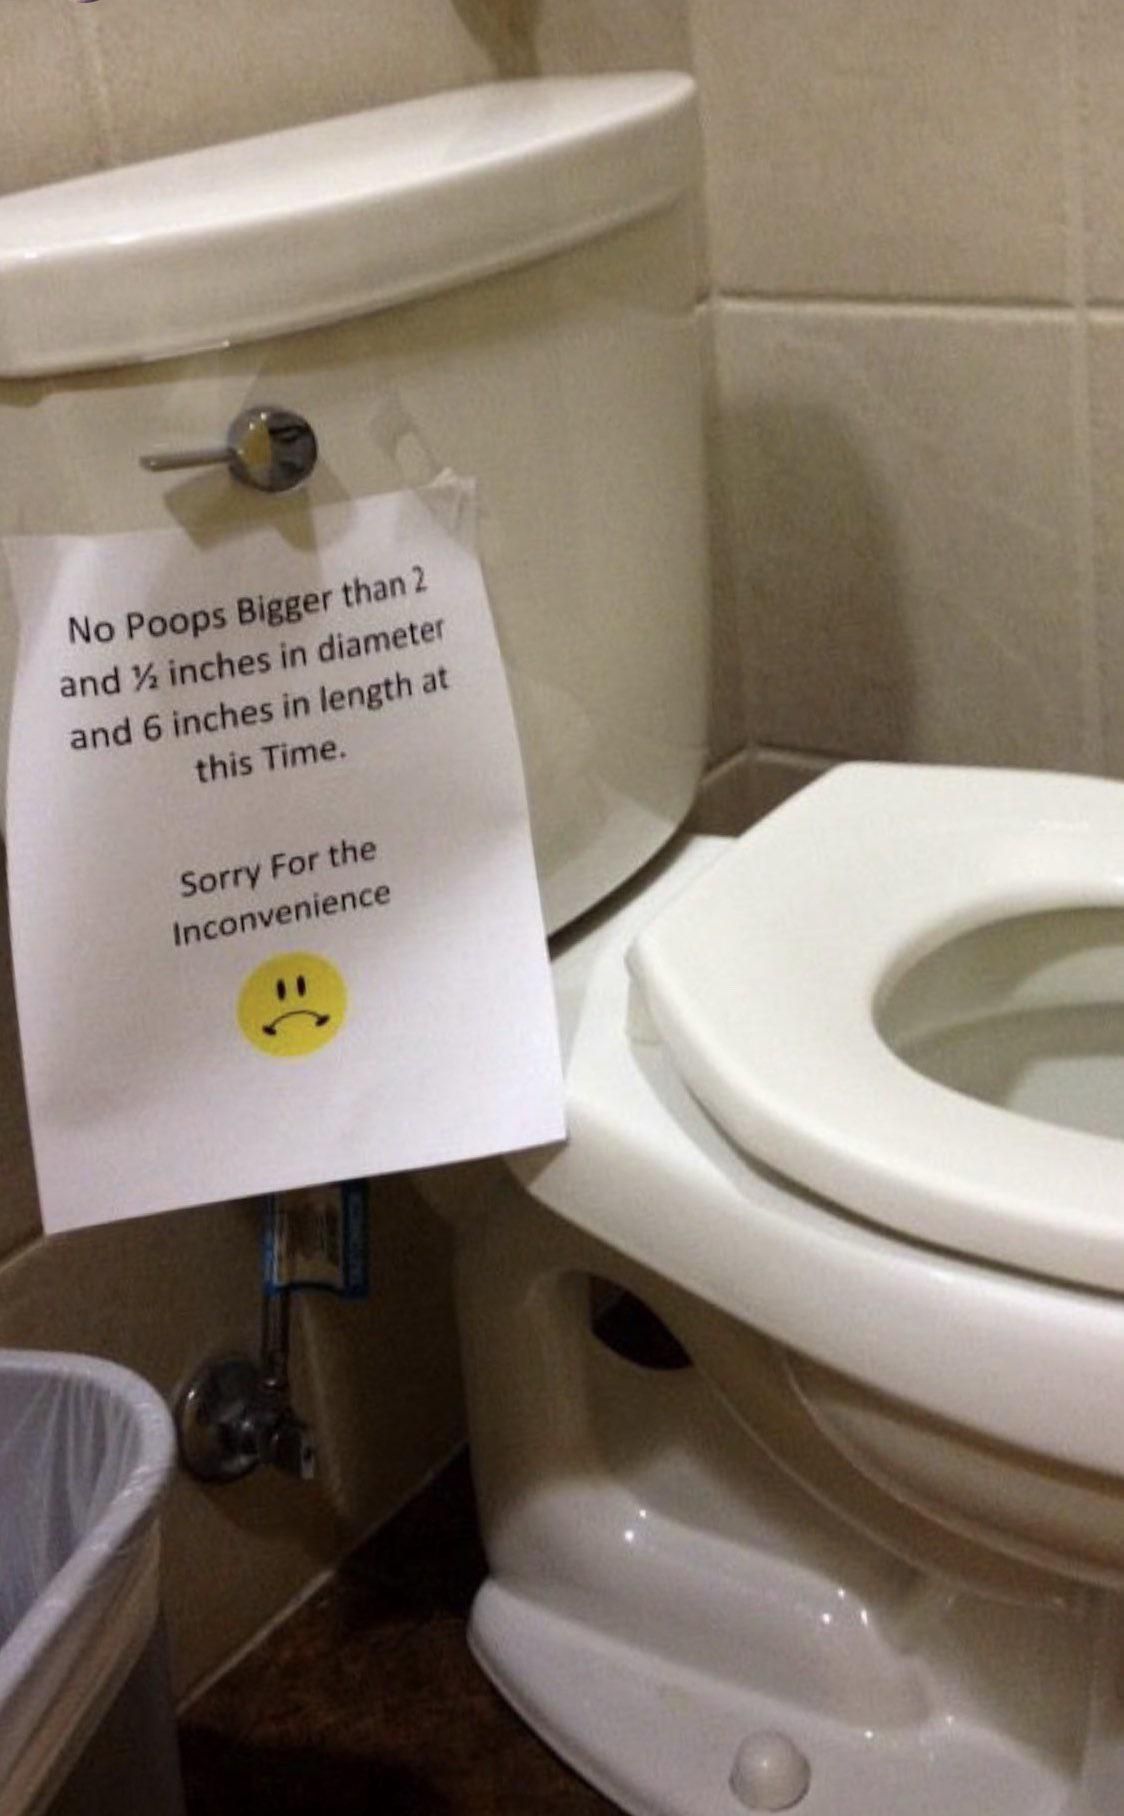 All righty then! I will just pee..